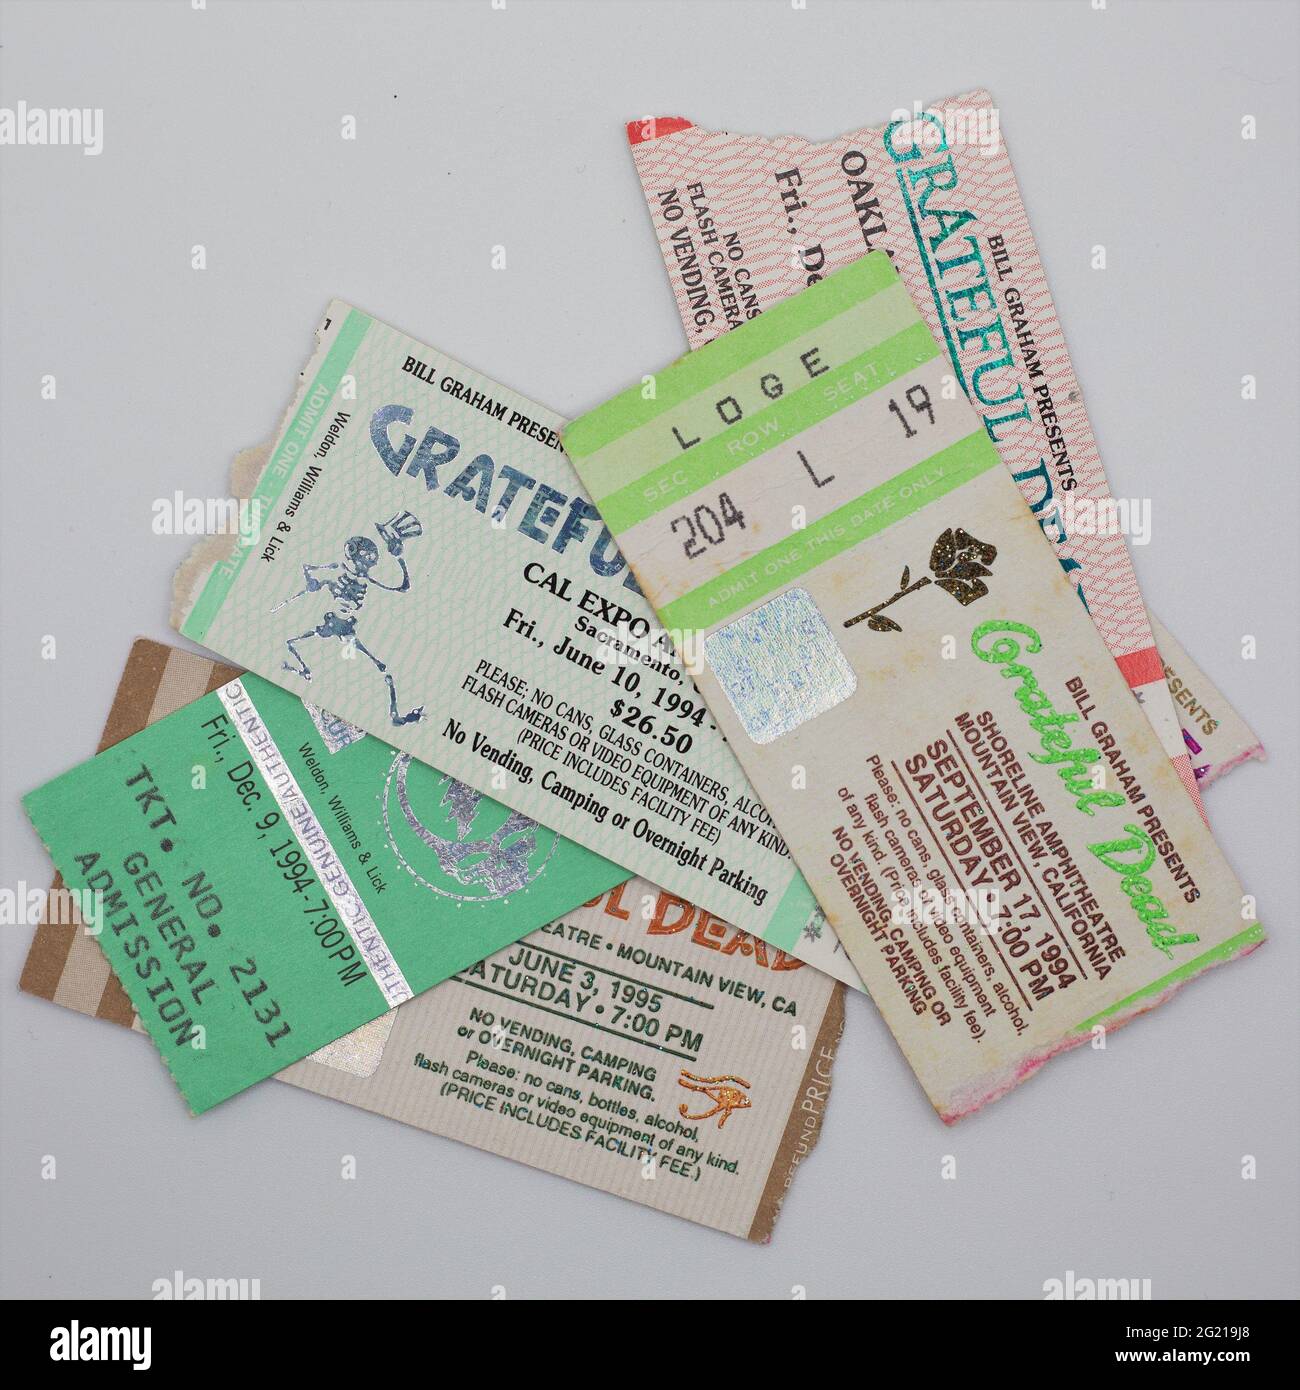 A pile of Grateful Dead ticket stubs from the 1990s. Stock Photo